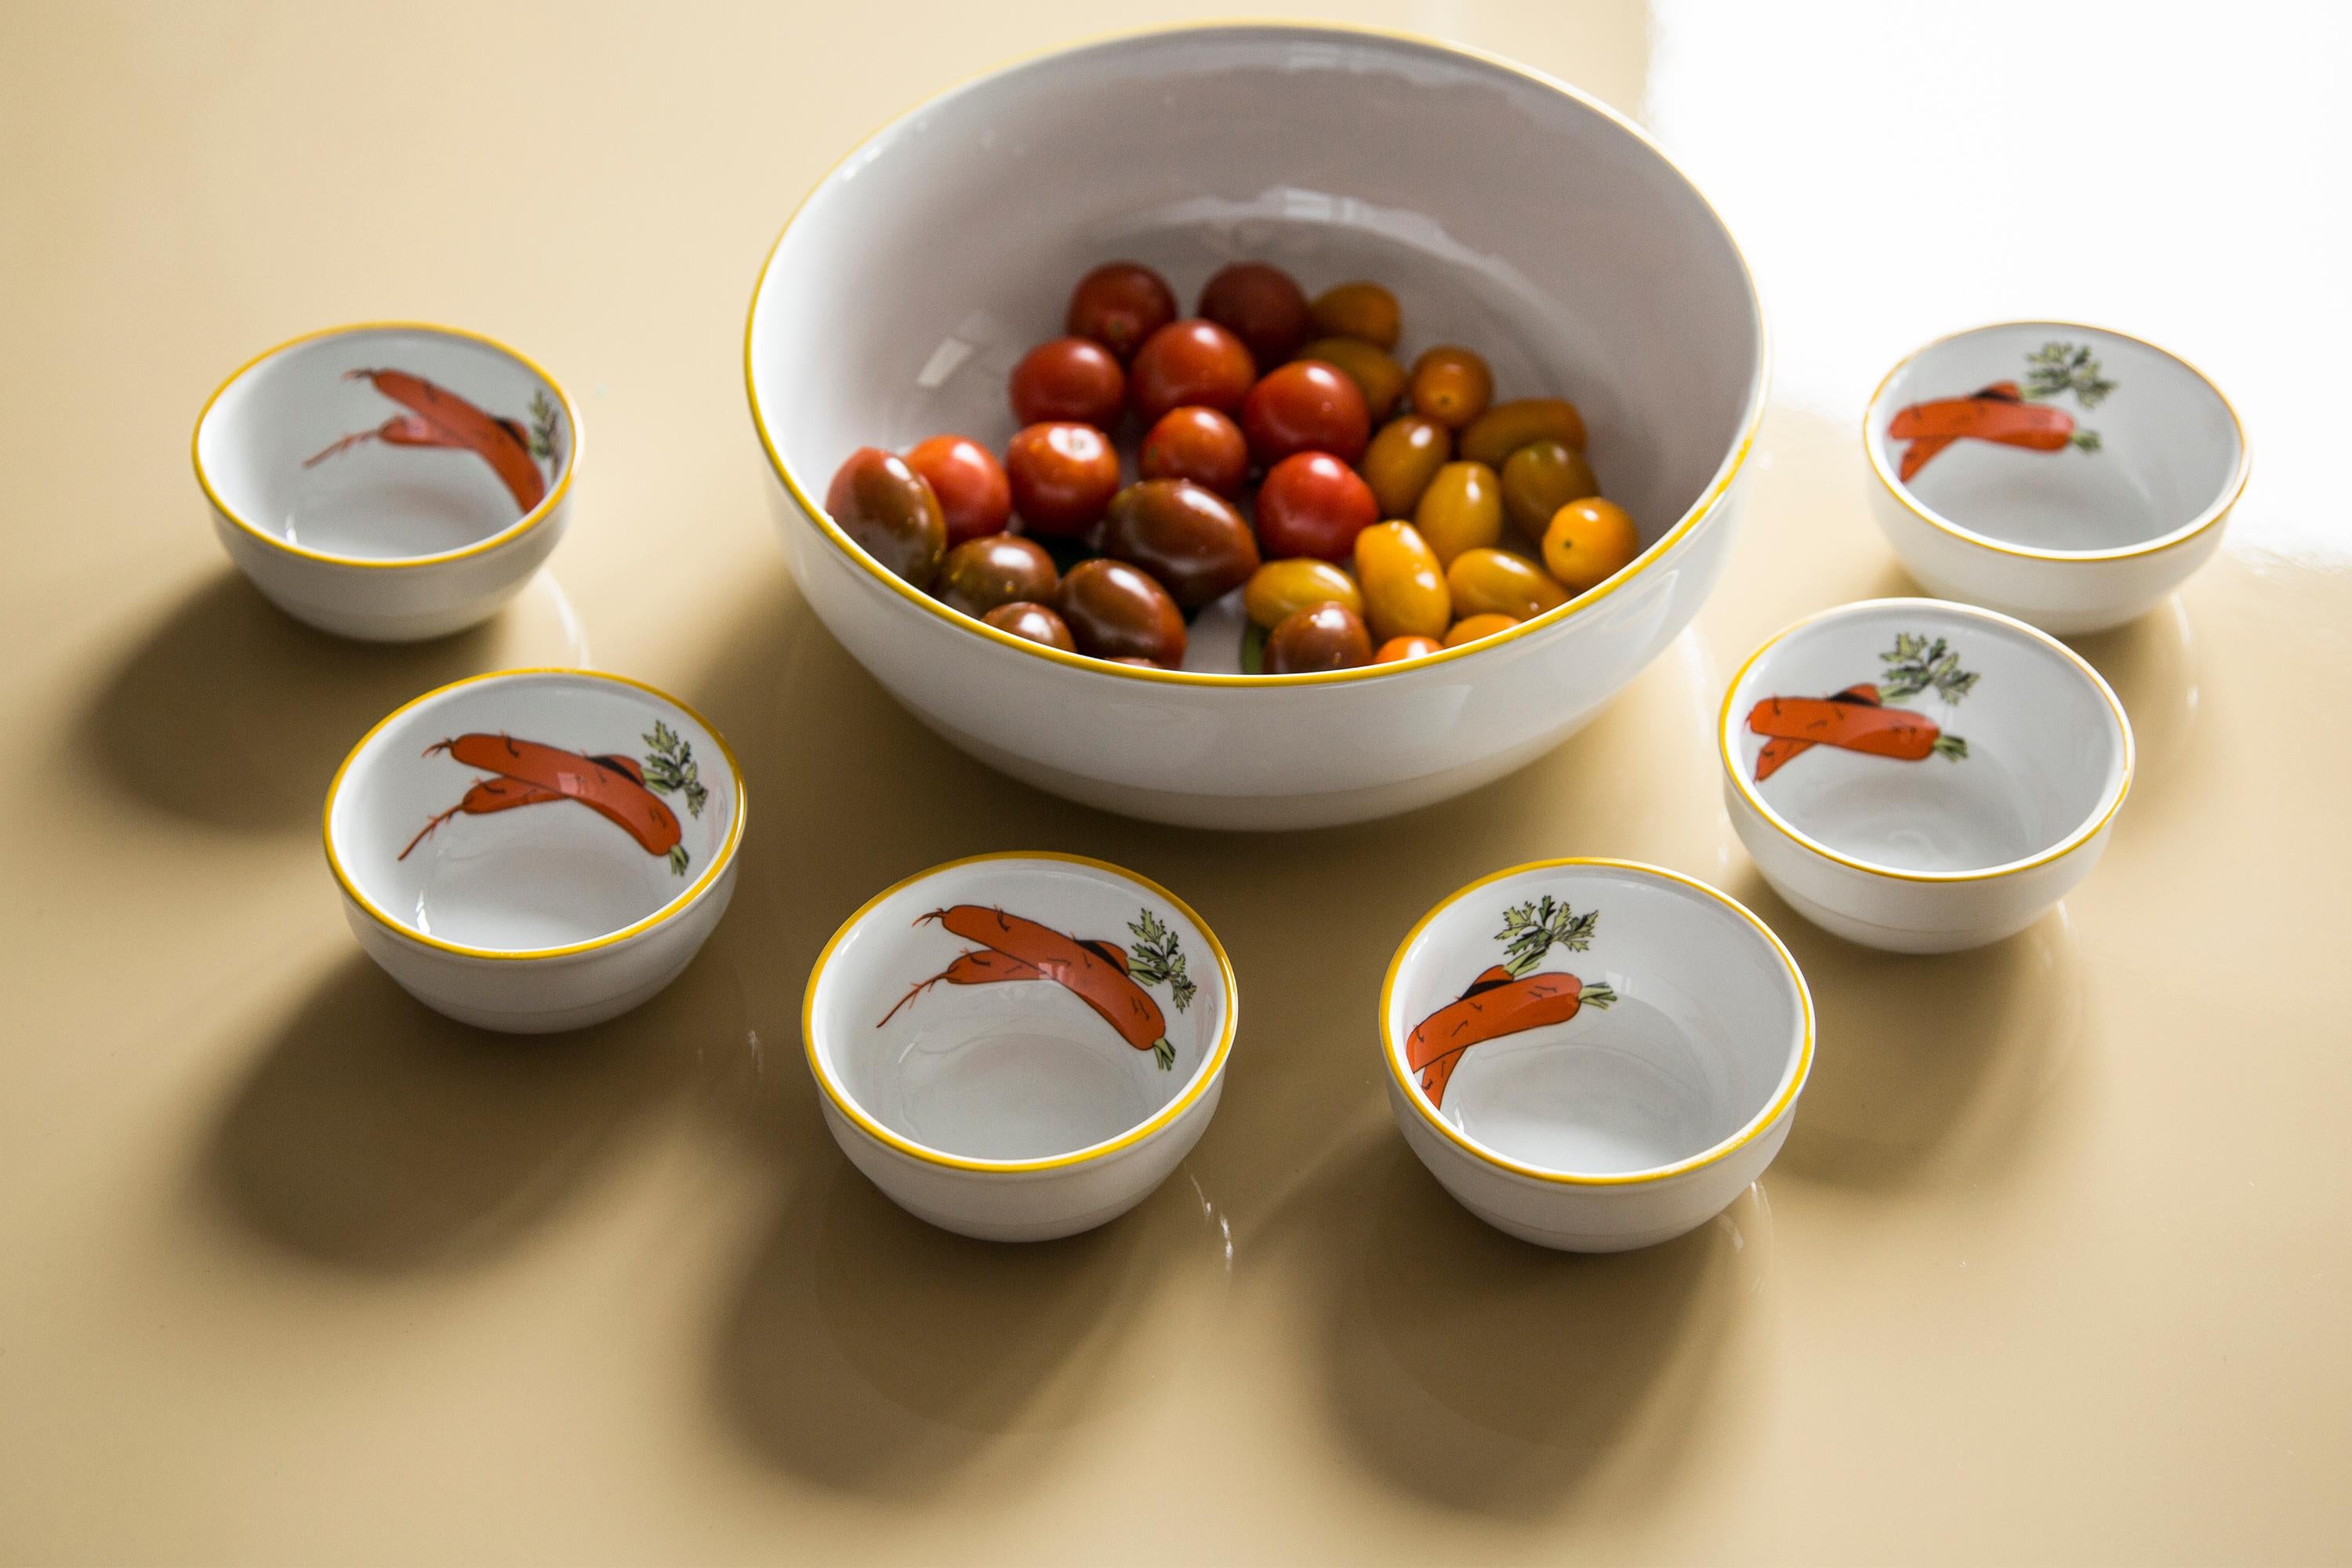 Set of decorative carrot salad bowls from Italy. Produced in 1970s.
Every plate is hand painted. Plates are in very good vintage condition, no damage or cracks. Original glass. Beautiful pieces for every interior! Only one unique set.